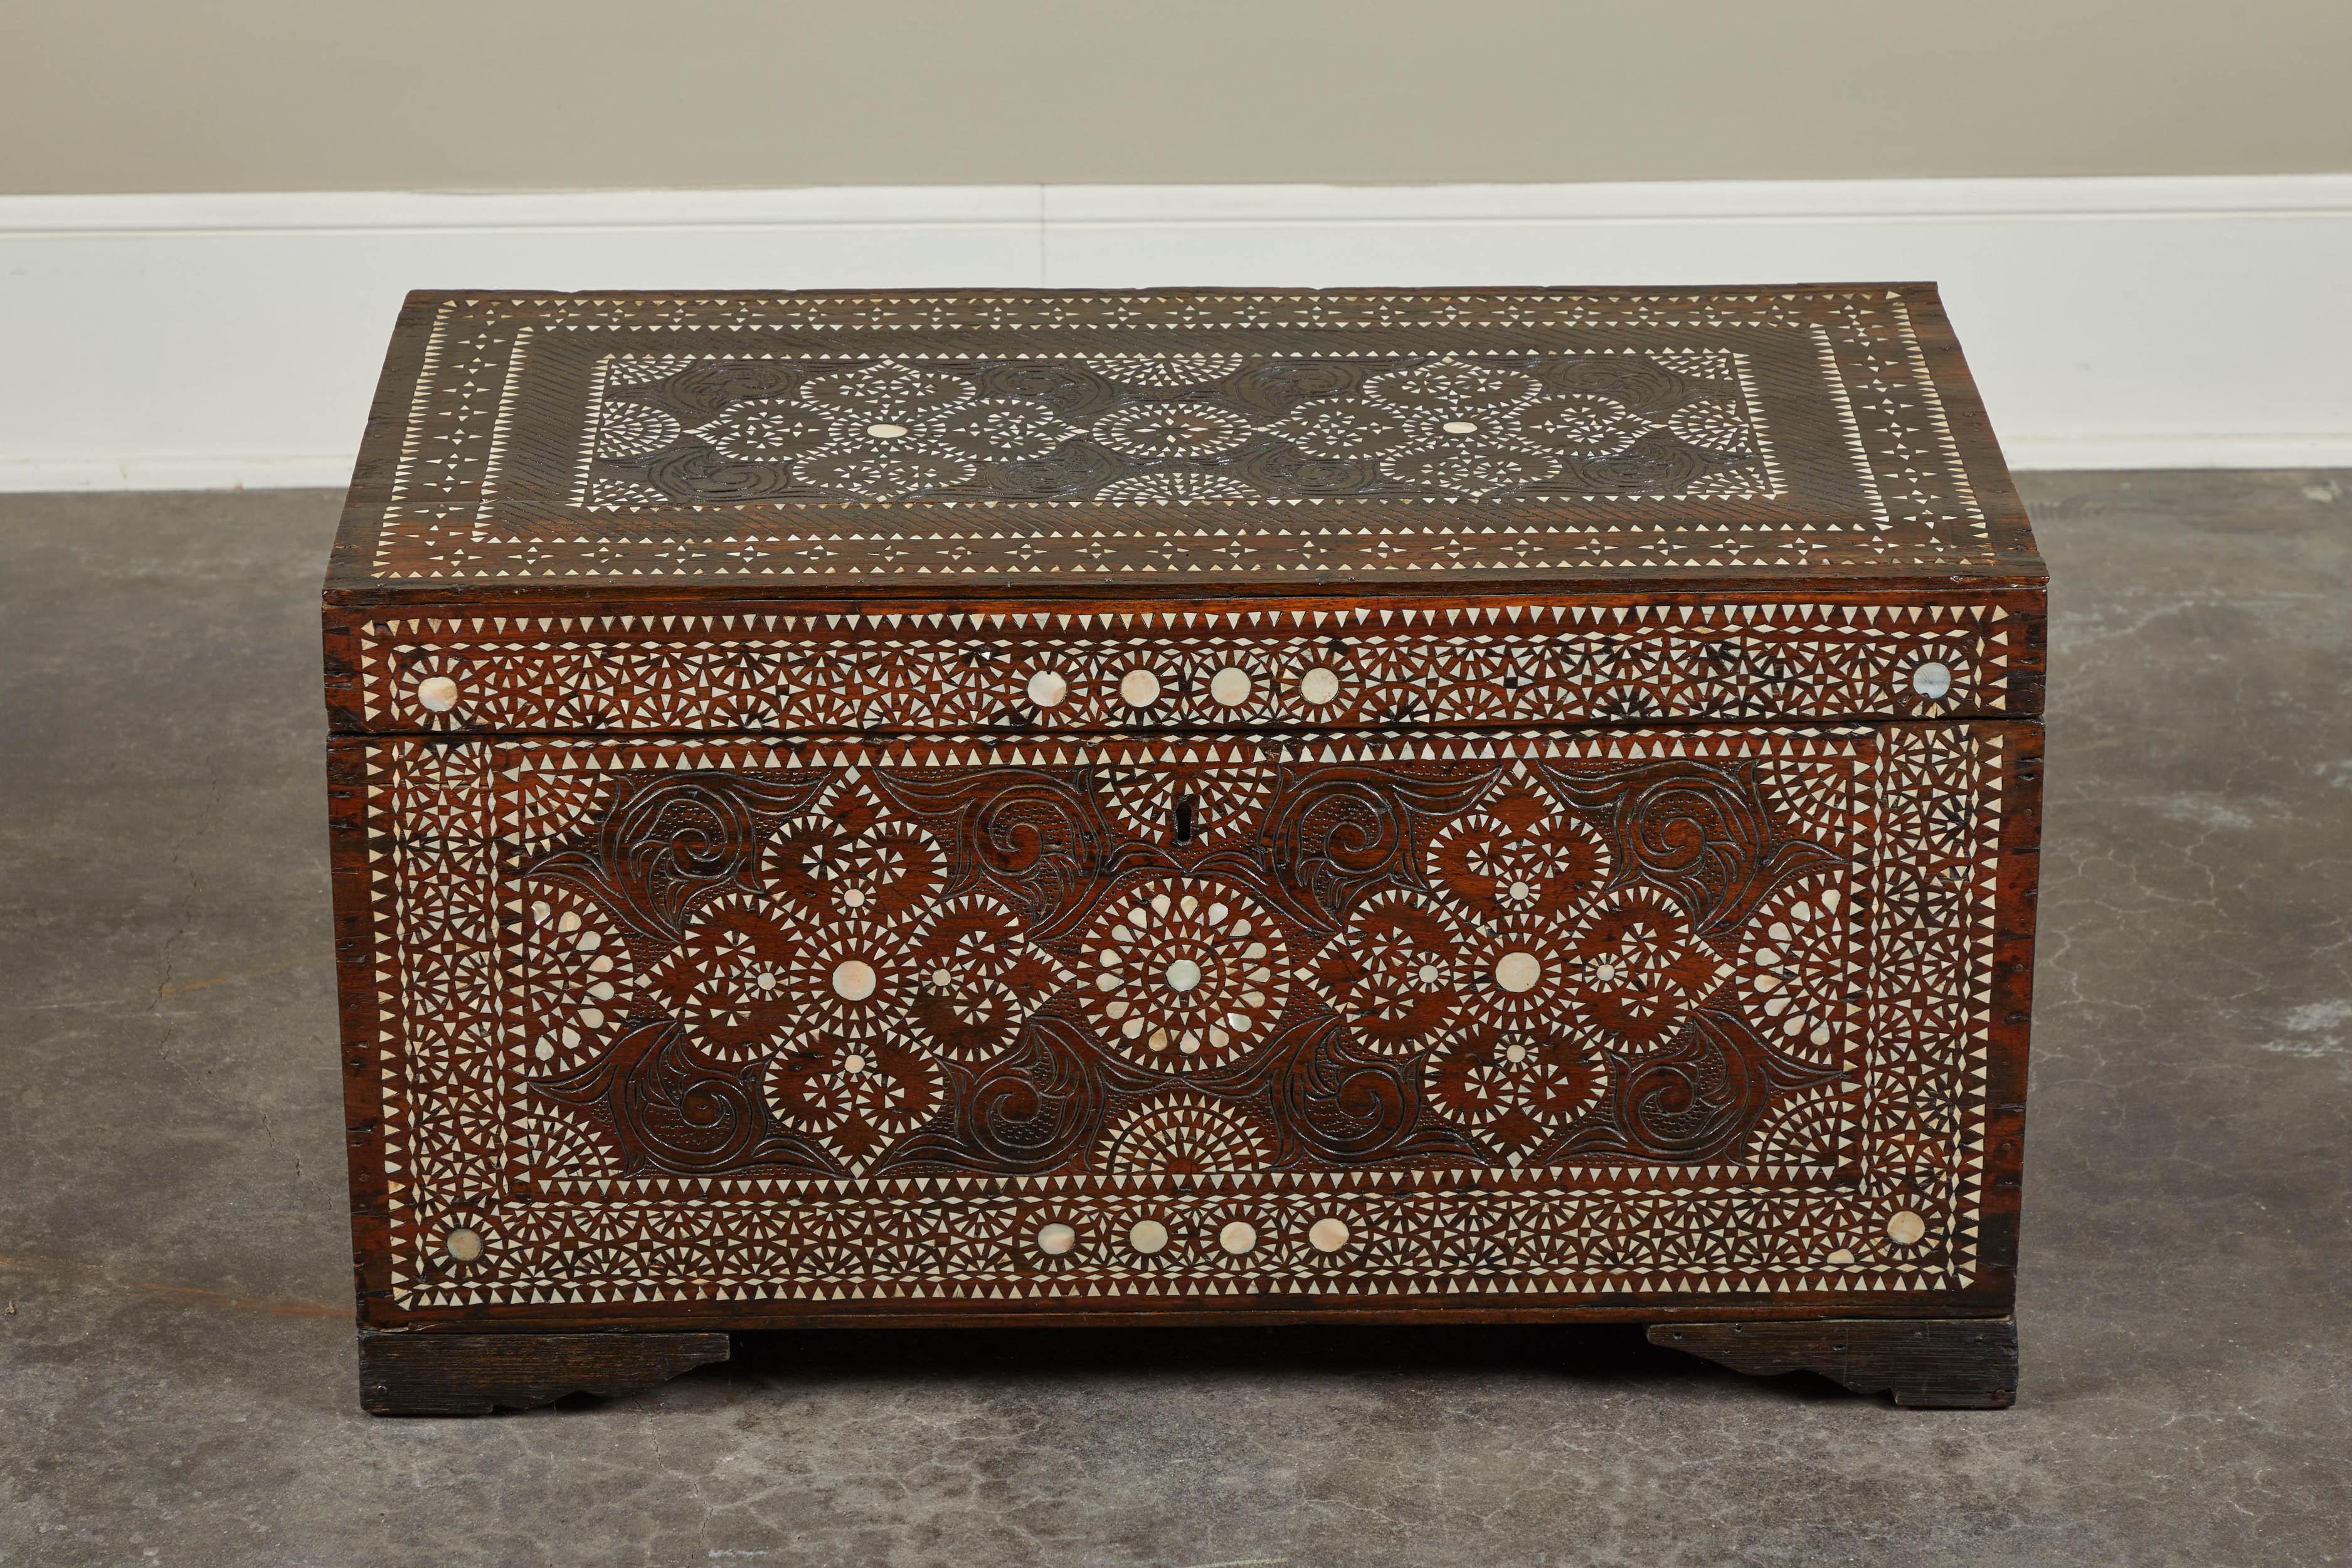 A dark-wood 20th century heavily-inlaid trunk of Filipino origin. Handles on either side and hinged top make it functional as occasional storage, as well.